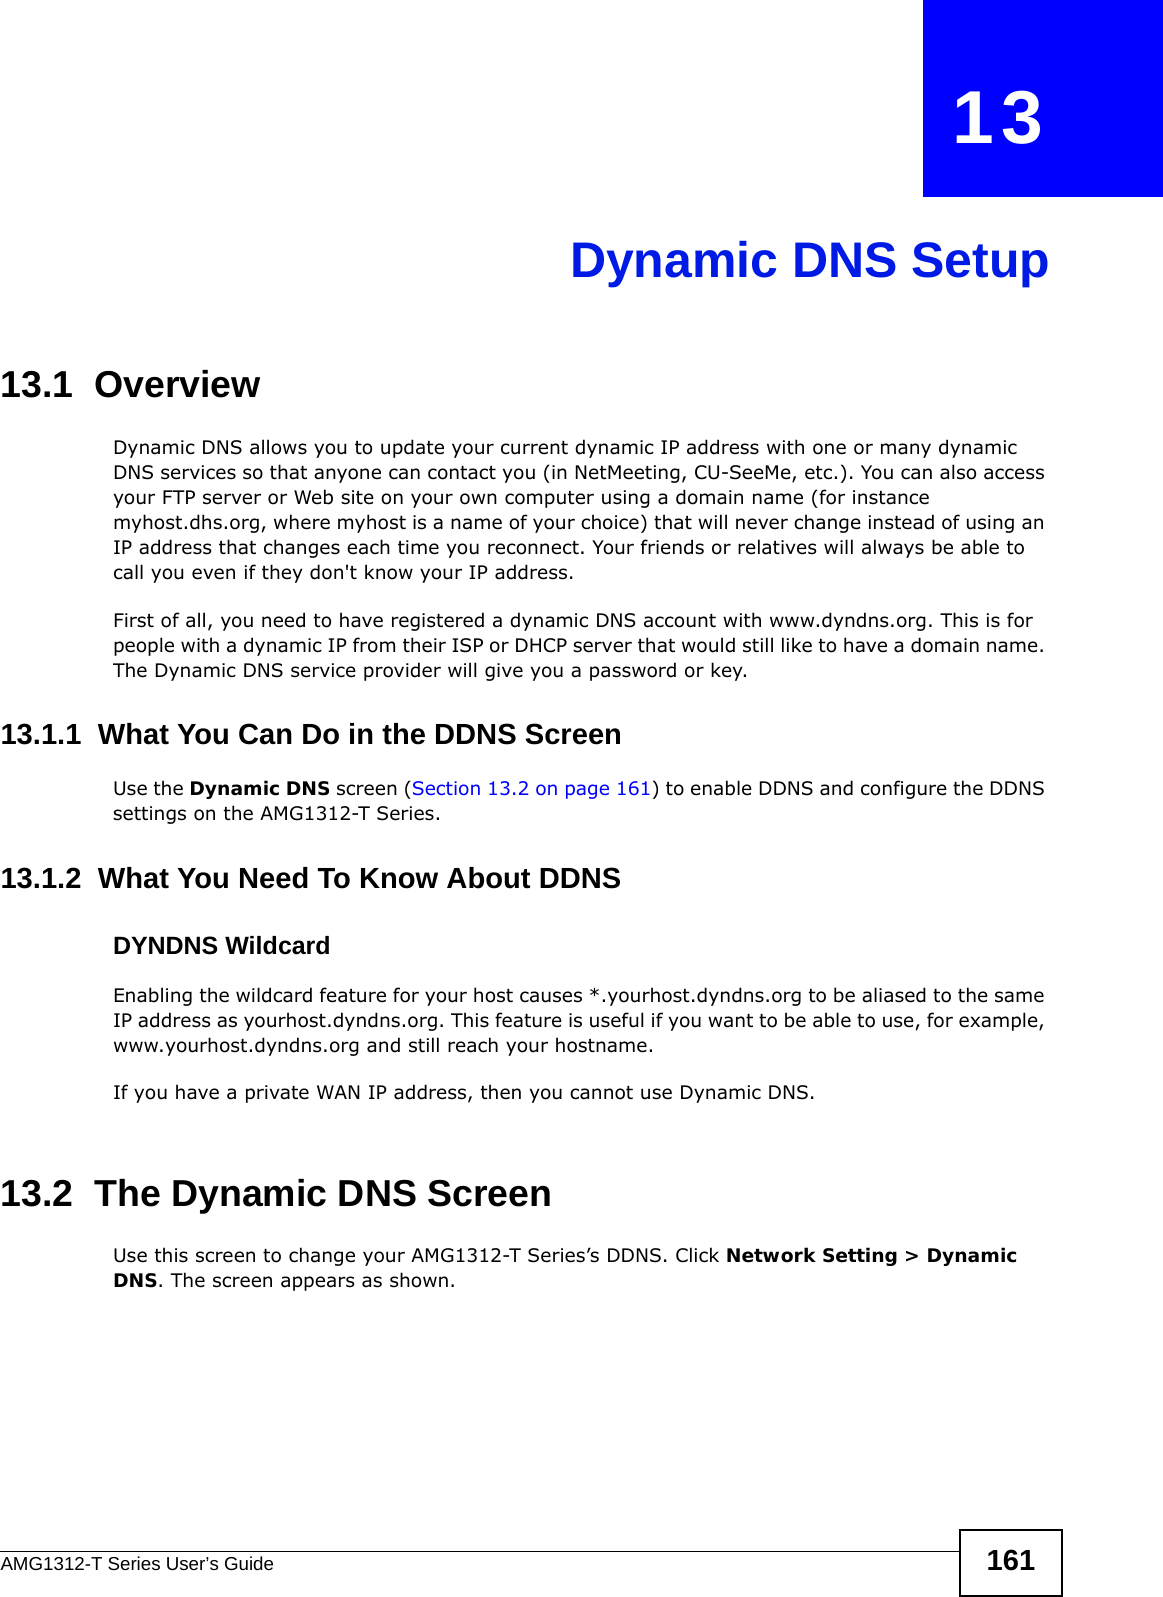 AMG1312-T Series User’s Guide 161CHAPTER   13Dynamic DNS Setup13.1  Overview Dynamic DNS allows you to update your current dynamic IP address with one or many dynamic DNS services so that anyone can contact you (in NetMeeting, CU-SeeMe, etc.). You can also access your FTP server or Web site on your own computer using a domain name (for instance myhost.dhs.org, where myhost is a name of your choice) that will never change instead of using an IP address that changes each time you reconnect. Your friends or relatives will always be able to call you even if they don&apos;t know your IP address.First of all, you need to have registered a dynamic DNS account with www.dyndns.org. This is for people with a dynamic IP from their ISP or DHCP server that would still like to have a domain name. The Dynamic DNS service provider will give you a password or key. 13.1.1  What You Can Do in the DDNS ScreenUse the Dynamic DNS screen (Section 13.2 on page 161) to enable DDNS and configure the DDNS settings on the AMG1312-T Series.13.1.2  What You Need To Know About DDNSDYNDNS WildcardEnabling the wildcard feature for your host causes *.yourhost.dyndns.org to be aliased to the same IP address as yourhost.dyndns.org. This feature is useful if you want to be able to use, for example, www.yourhost.dyndns.org and still reach your hostname.If you have a private WAN IP address, then you cannot use Dynamic DNS.13.2  The Dynamic DNS ScreenUse this screen to change your AMG1312-T Series’s DDNS. Click Network Setting &gt; Dynamic DNS. The screen appears as shown.